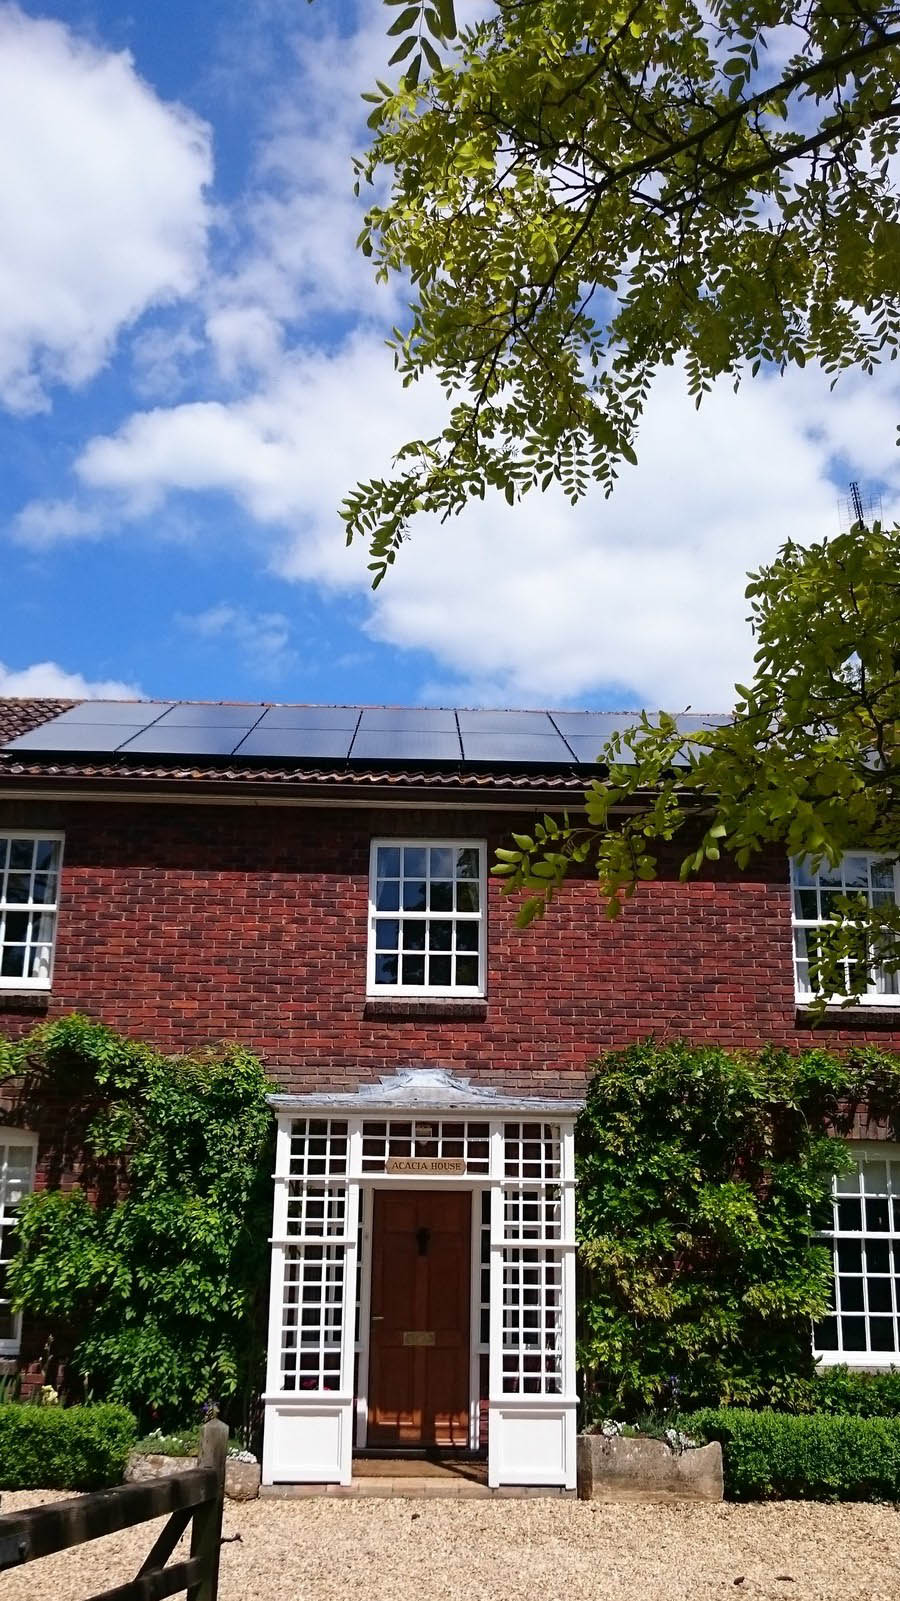 Solar panels on the roof of a large house near Cambridge